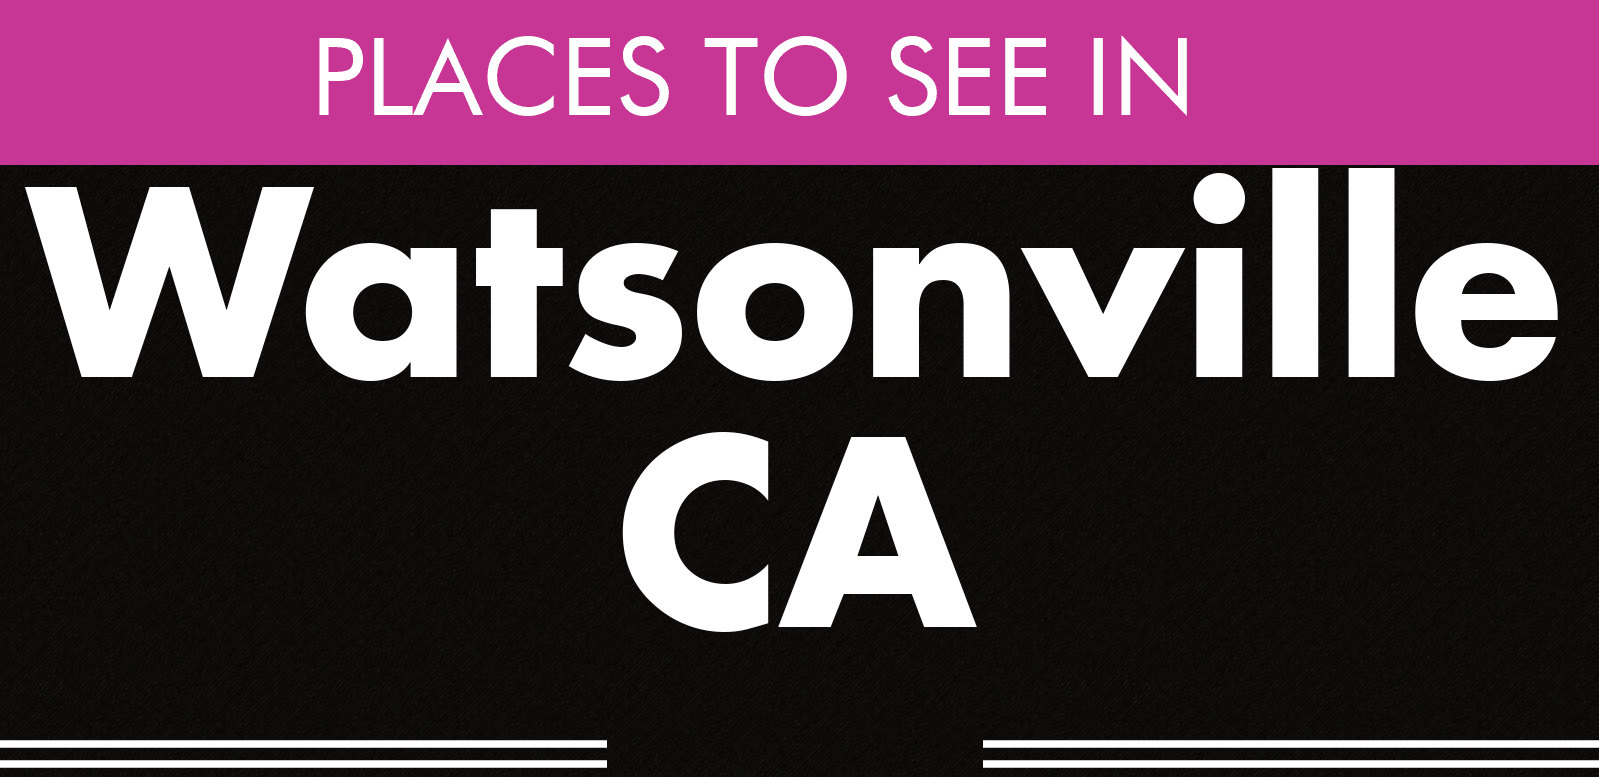 Places to see in Watsonville